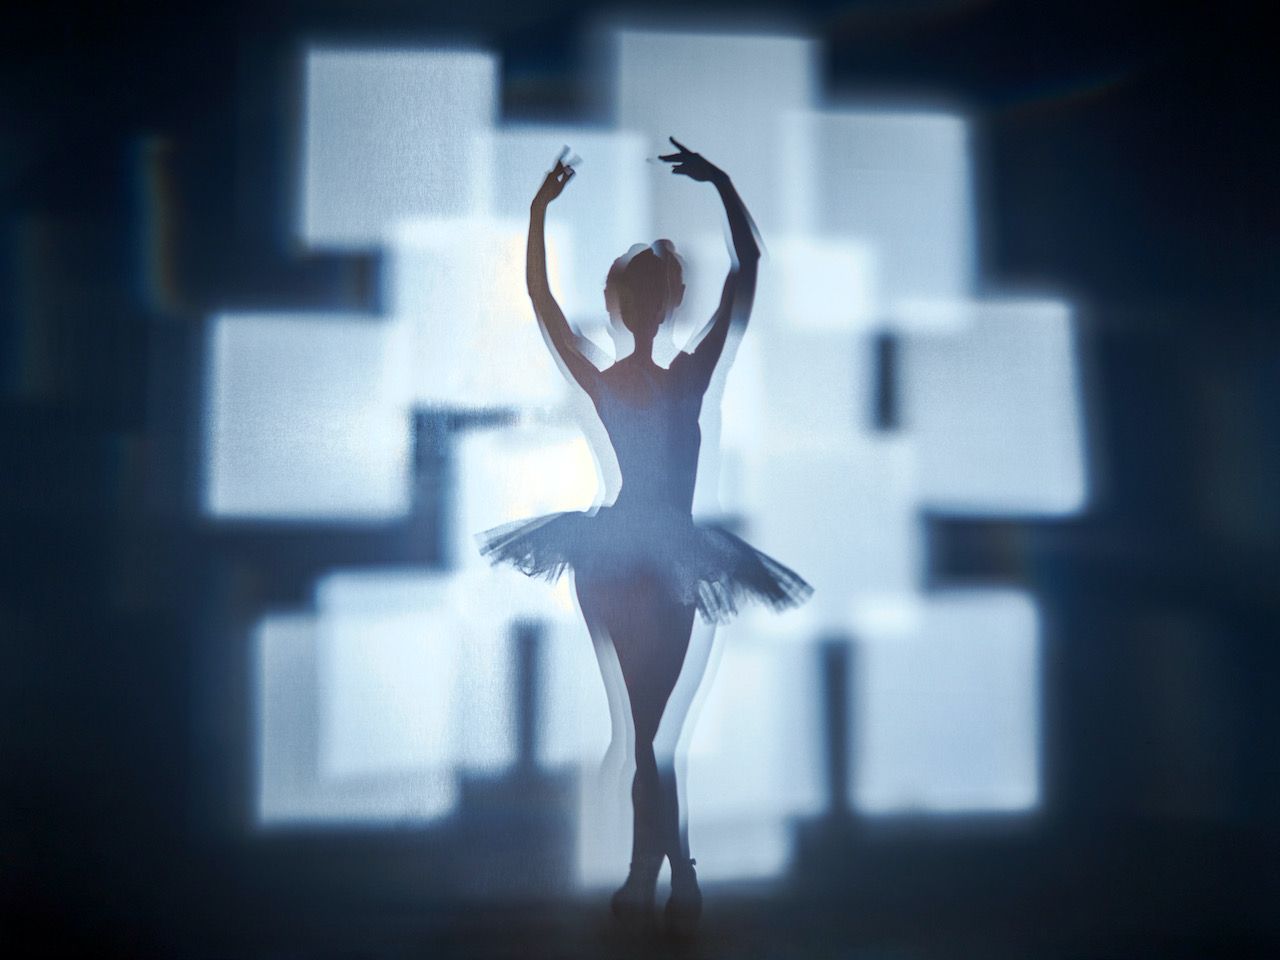 Michael Haegele abstract photography silhouette ballerina with luminous overlapping squares in the background